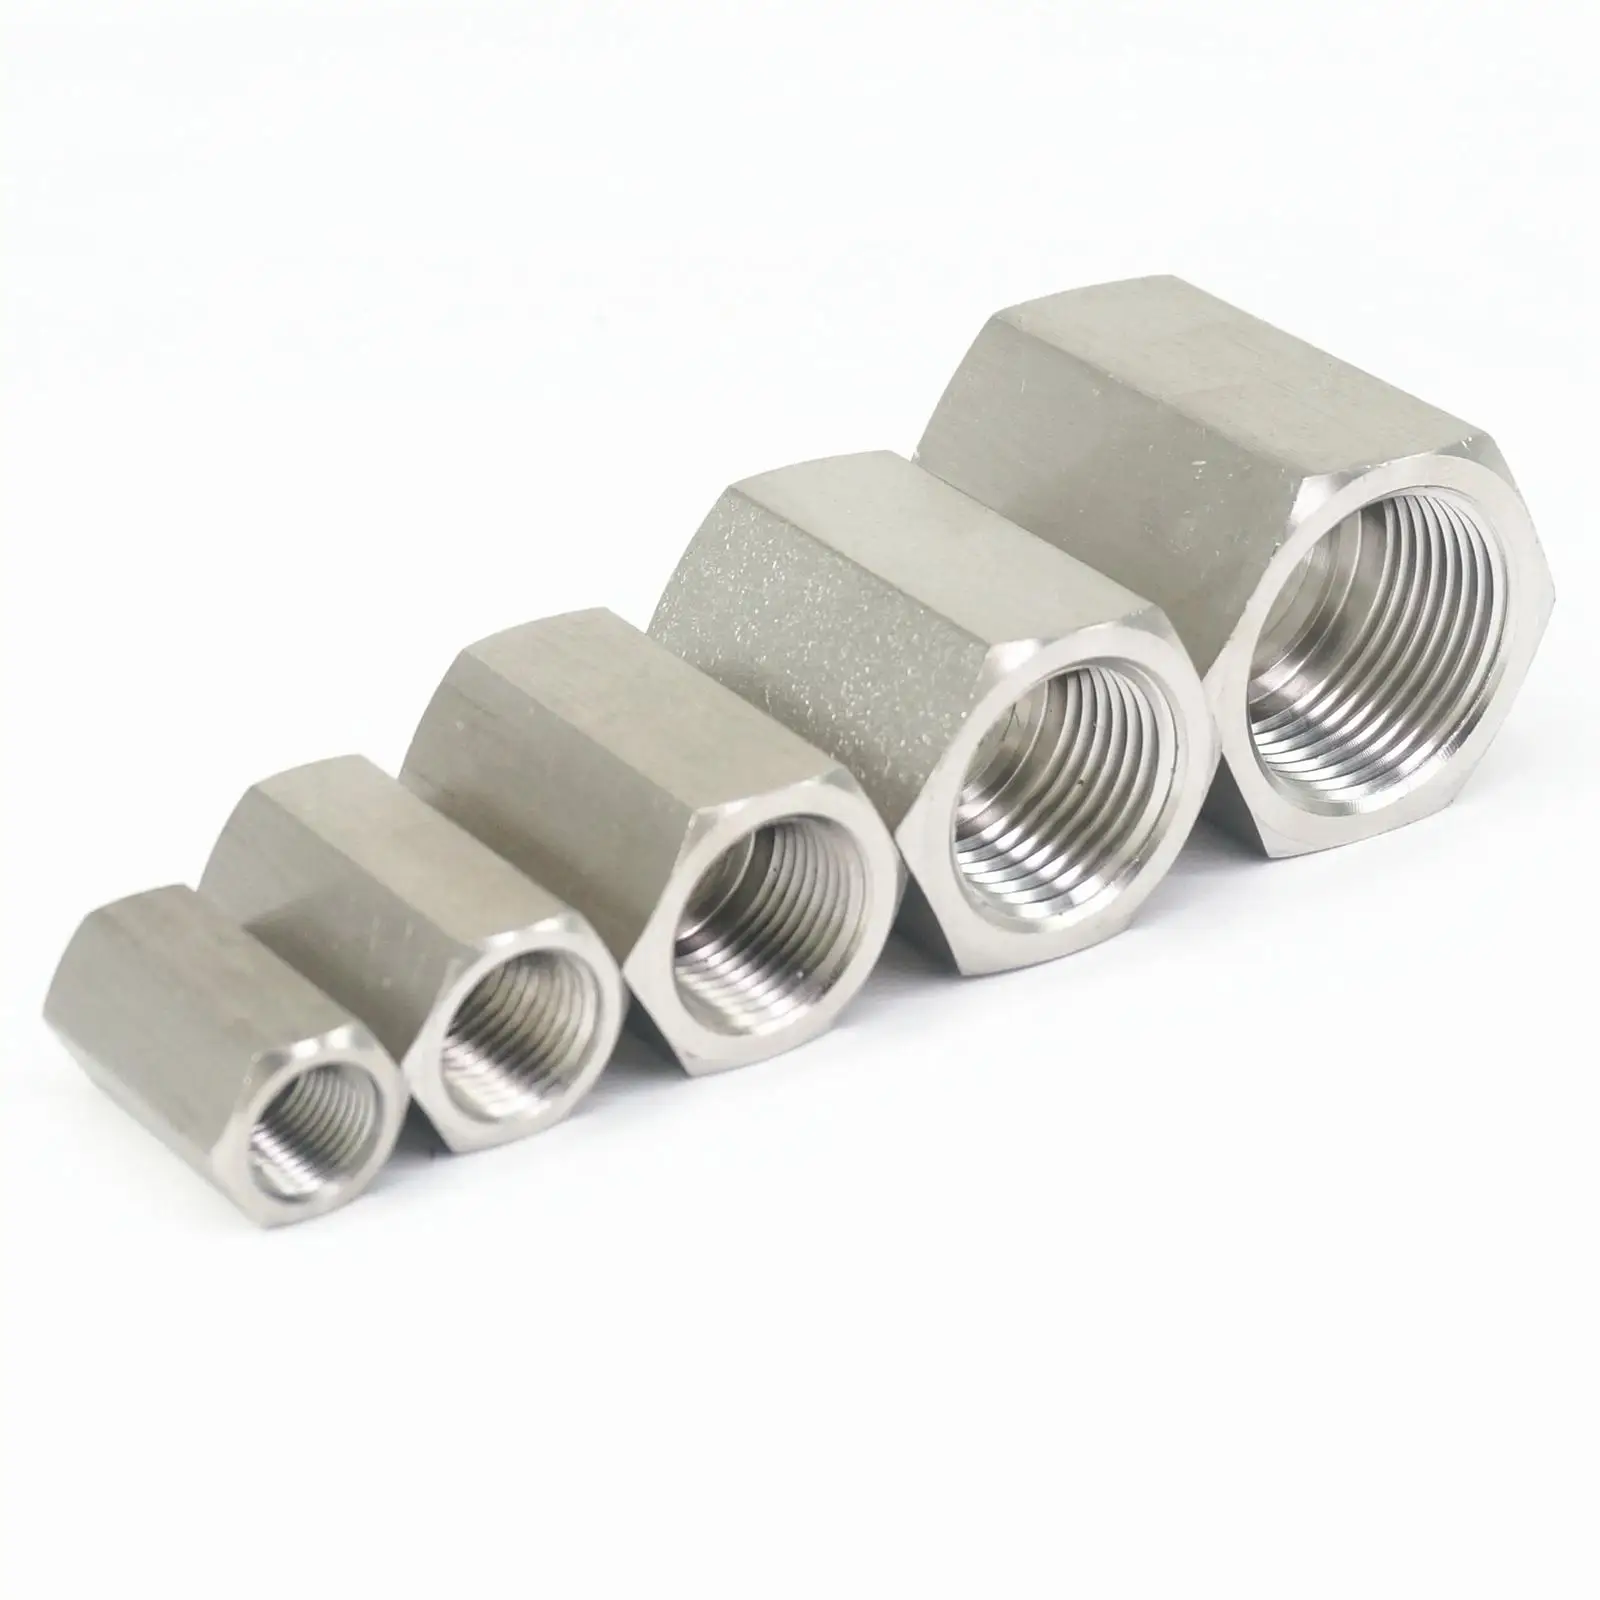 

High Pressure Reduce 1/8" 1/4" 3/8" 1/2" 3/4" 1" BSP M14 M20 M20 Female 304 Stainless Steel Hex Pipe Fitting Reducer